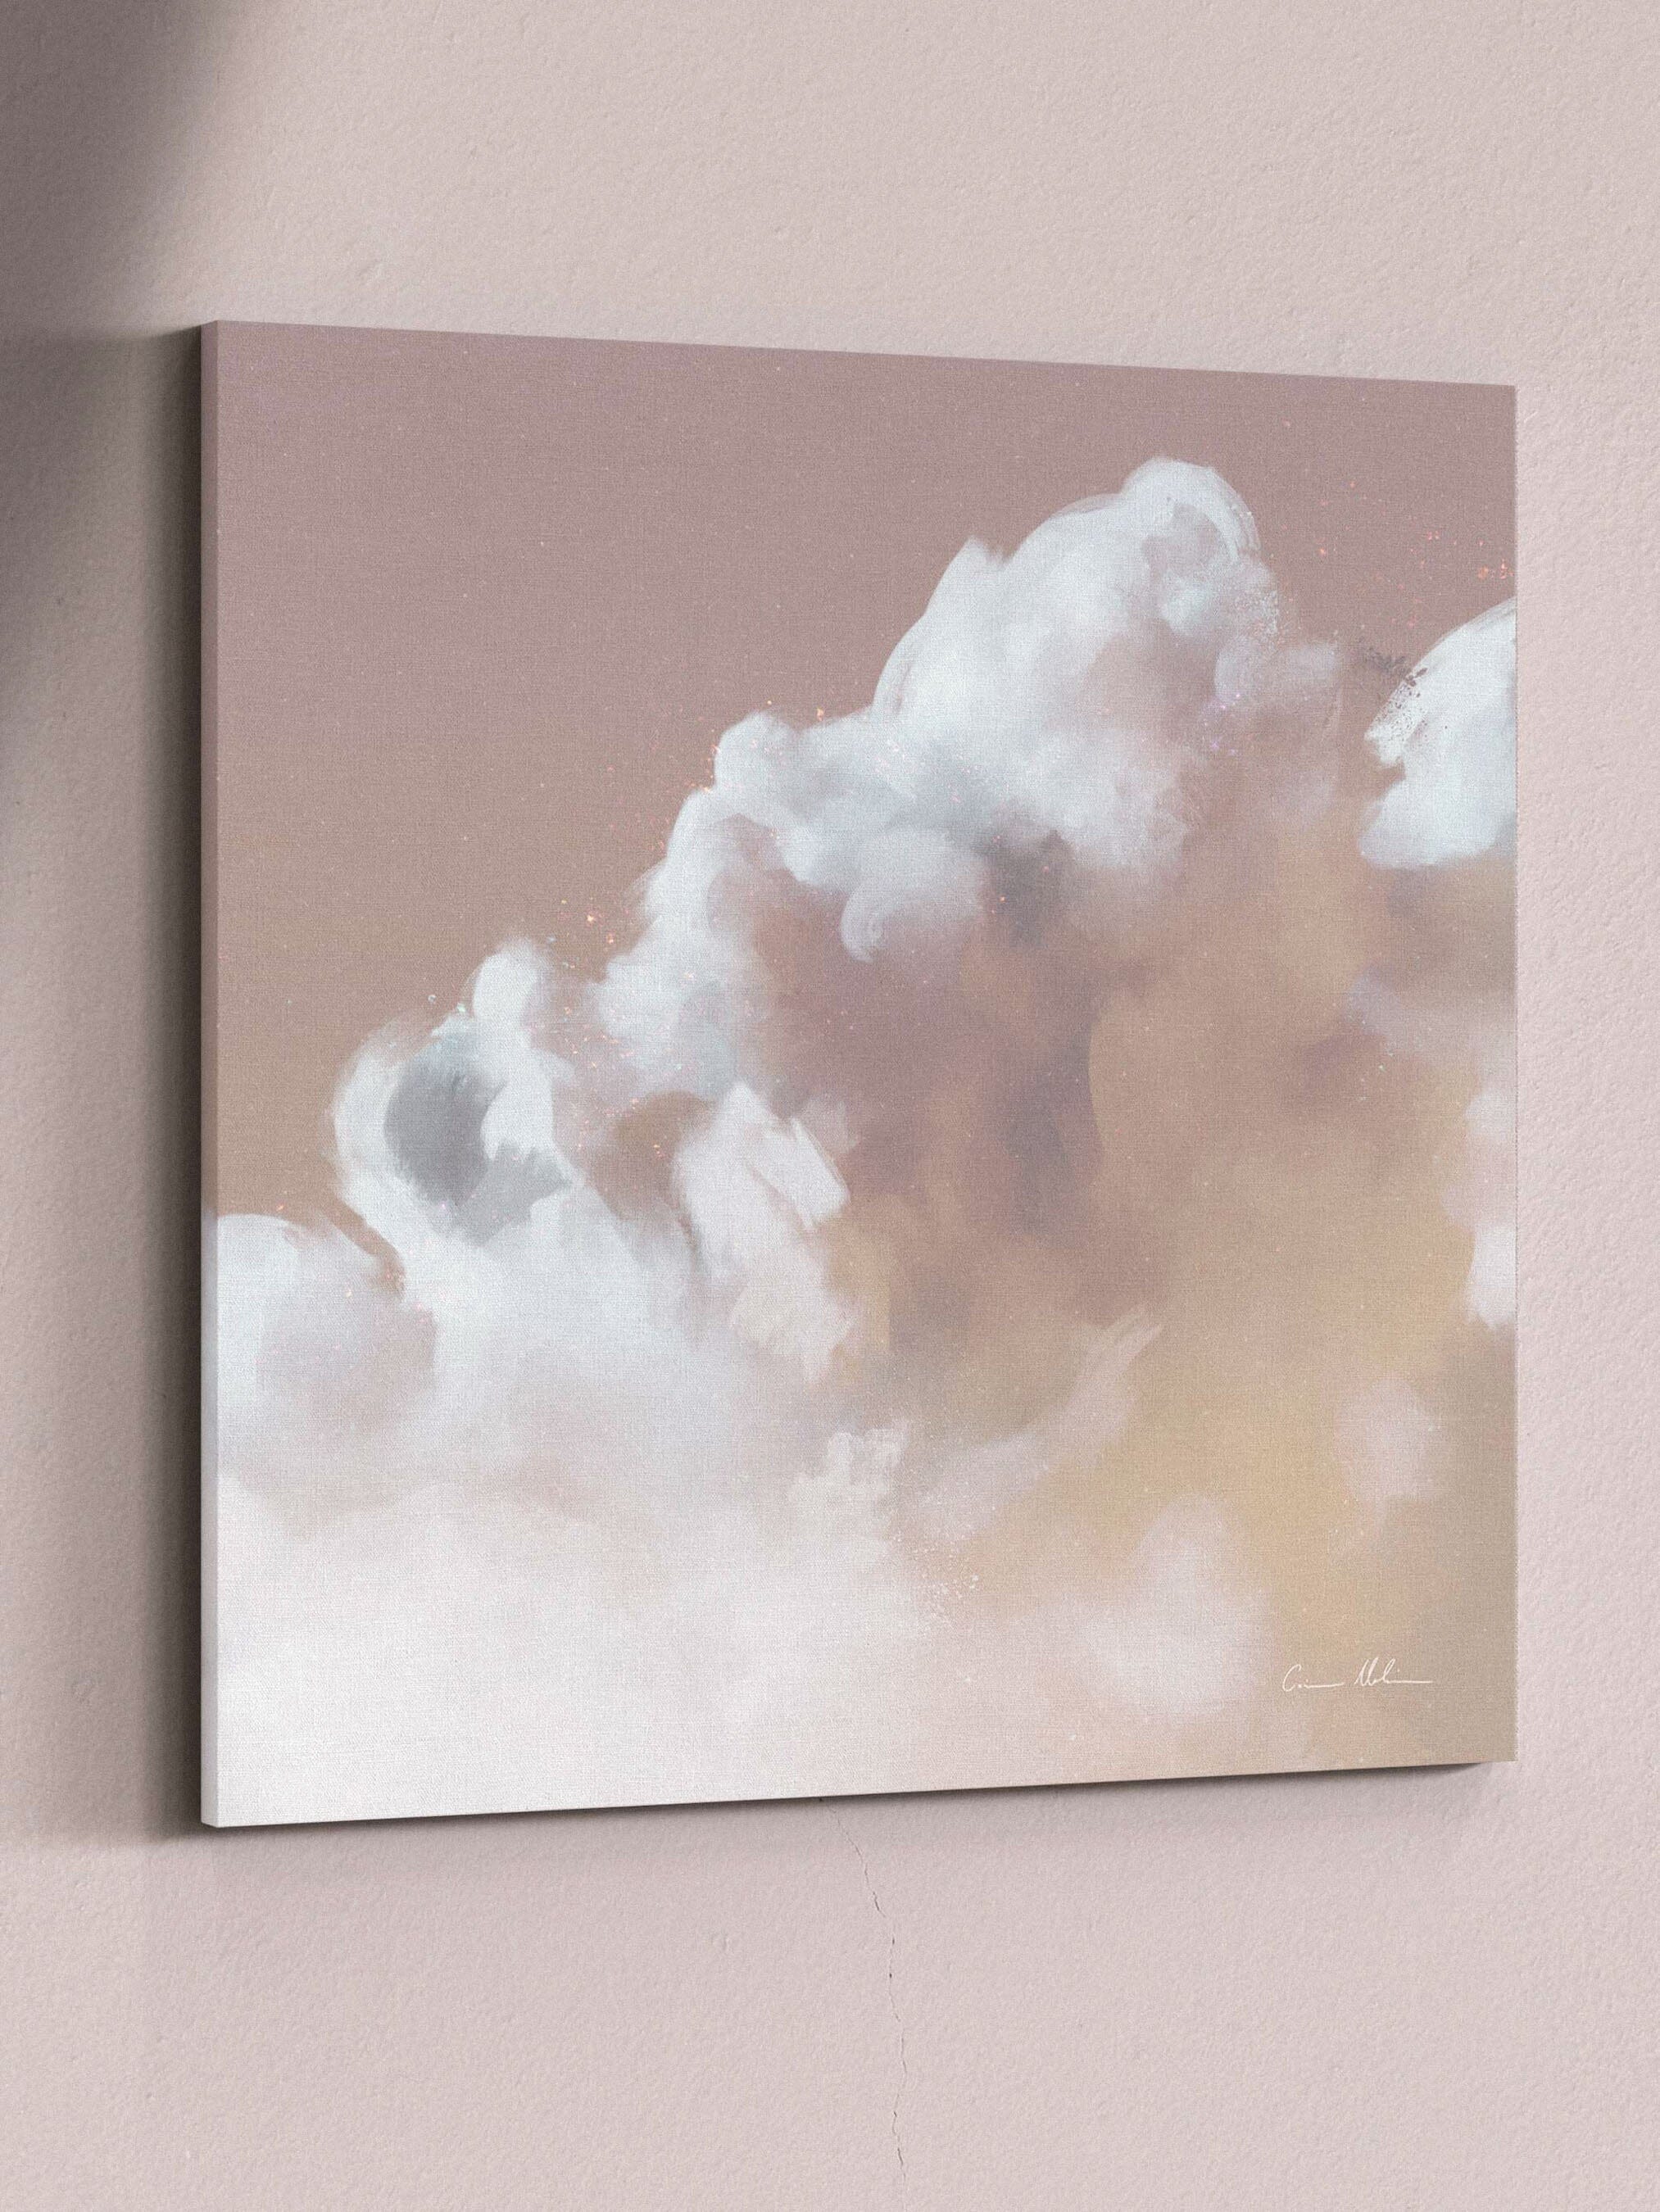 "Chroma Cloud No. 2" Square on Canvas Canvas Wall Art Corinne Melanie 20x20in / 50x50cm Stretched and Ready to Hang 